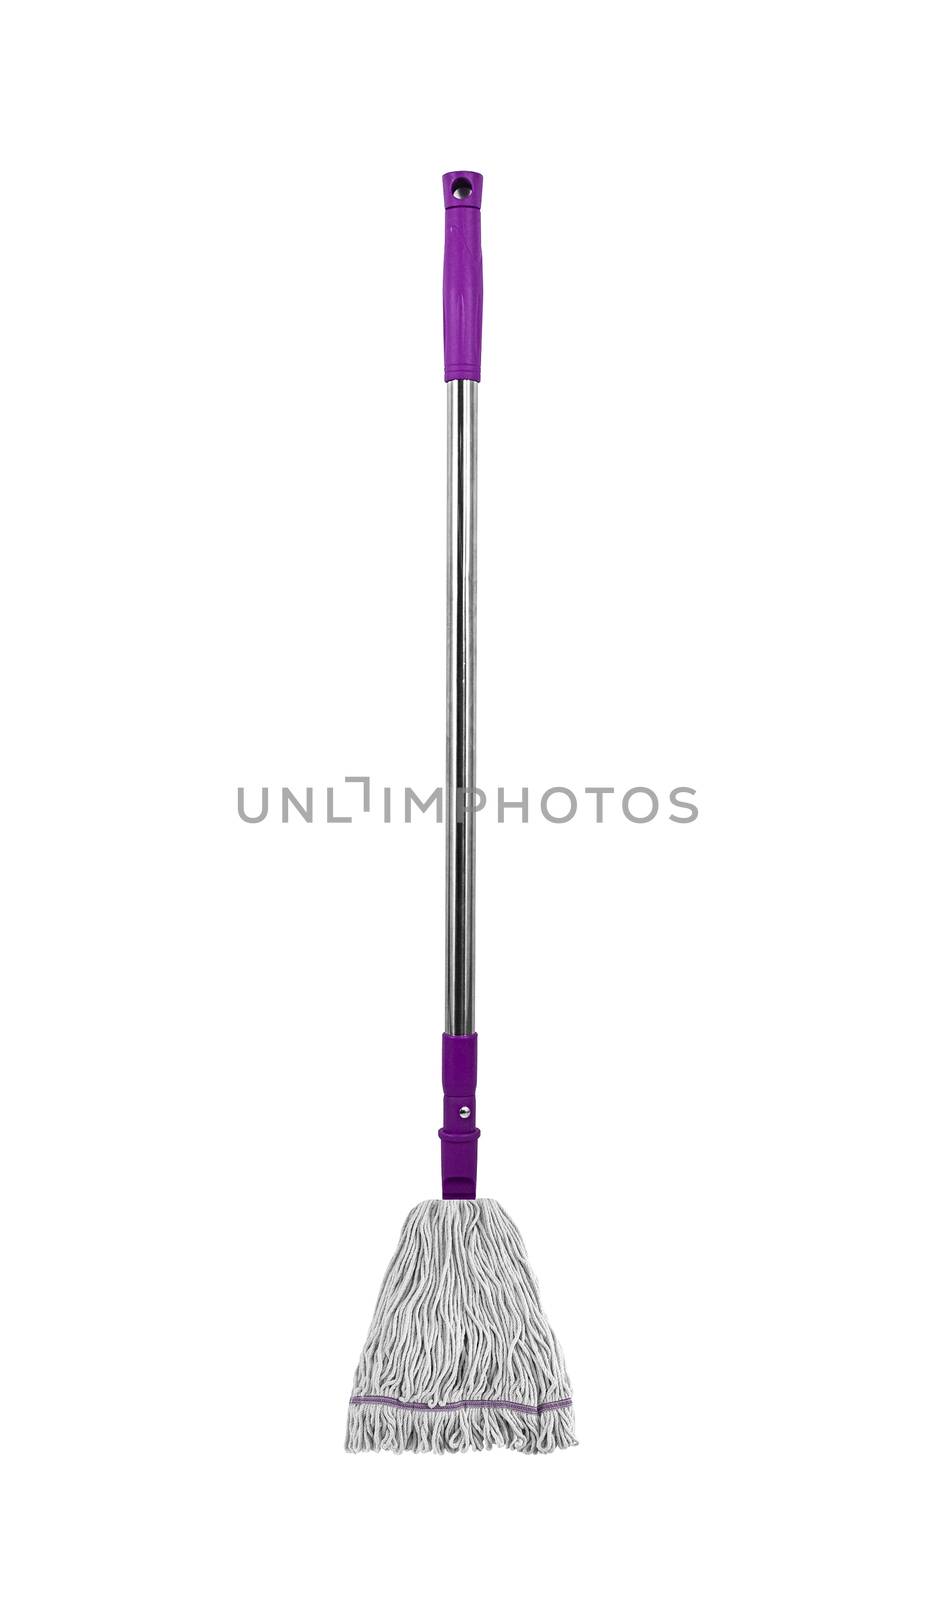 fiber mop for cleaning floor by ozaiachin